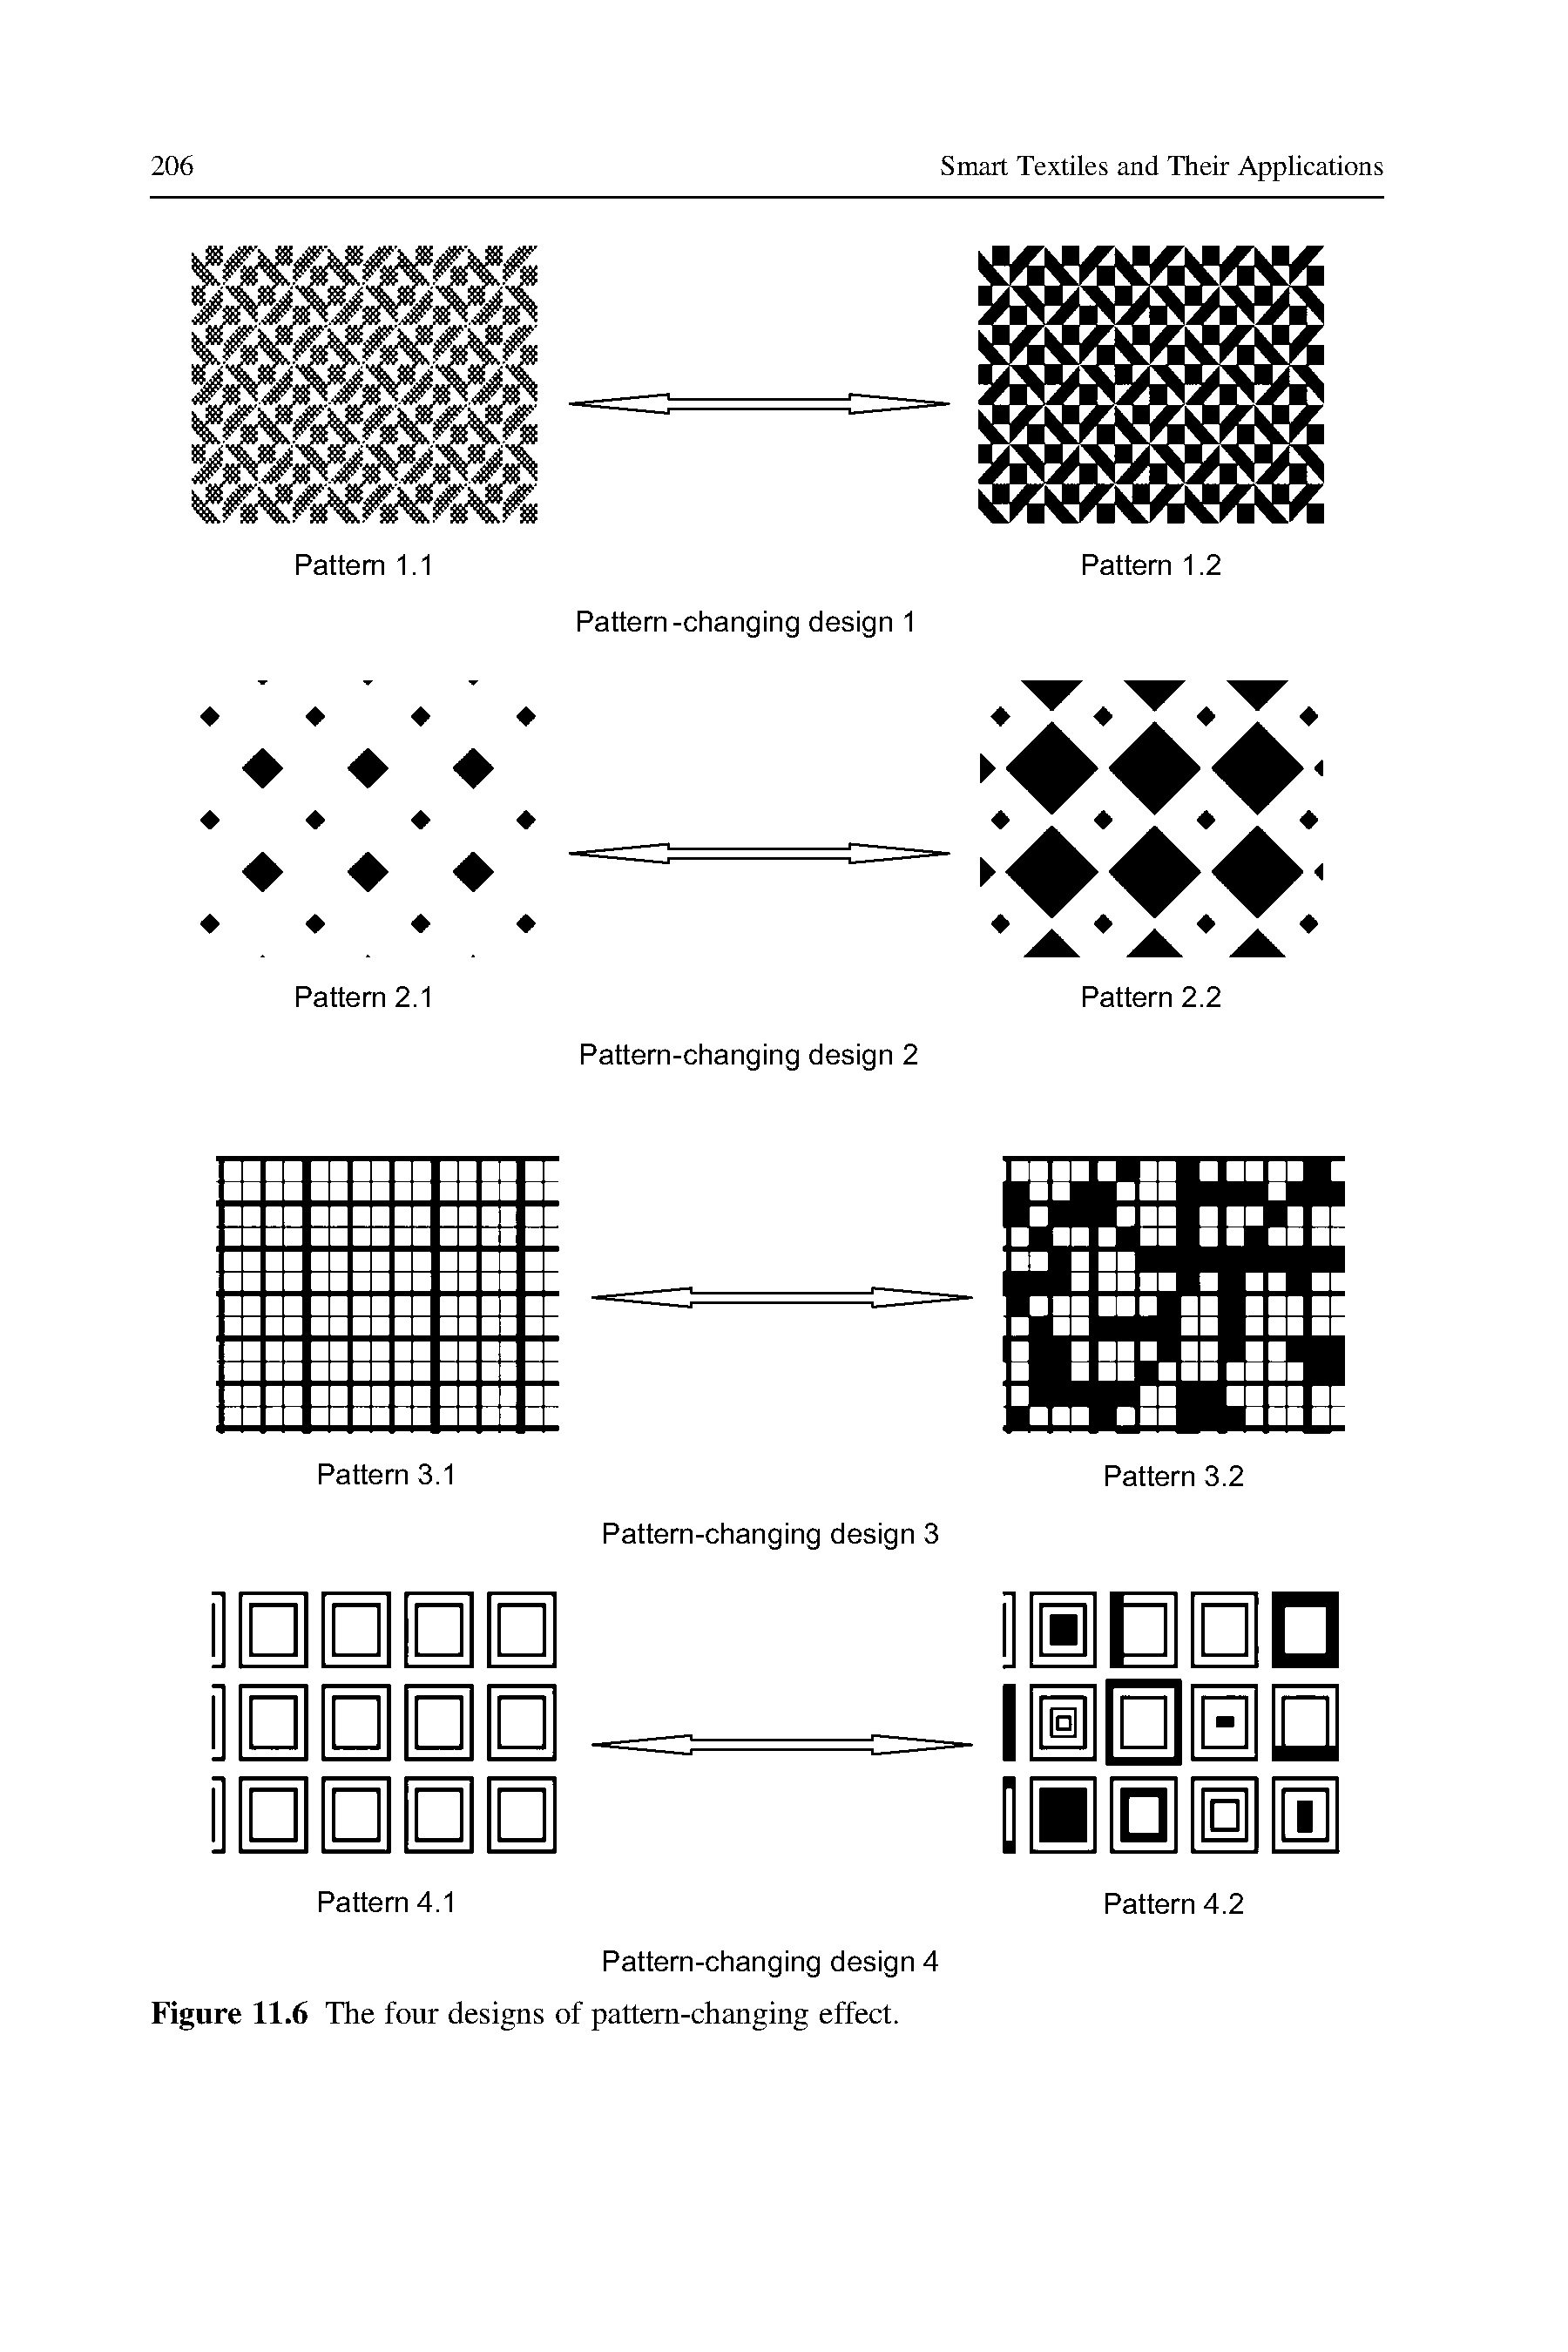 Figure 11.6 The four designs of pattern-changing effect.